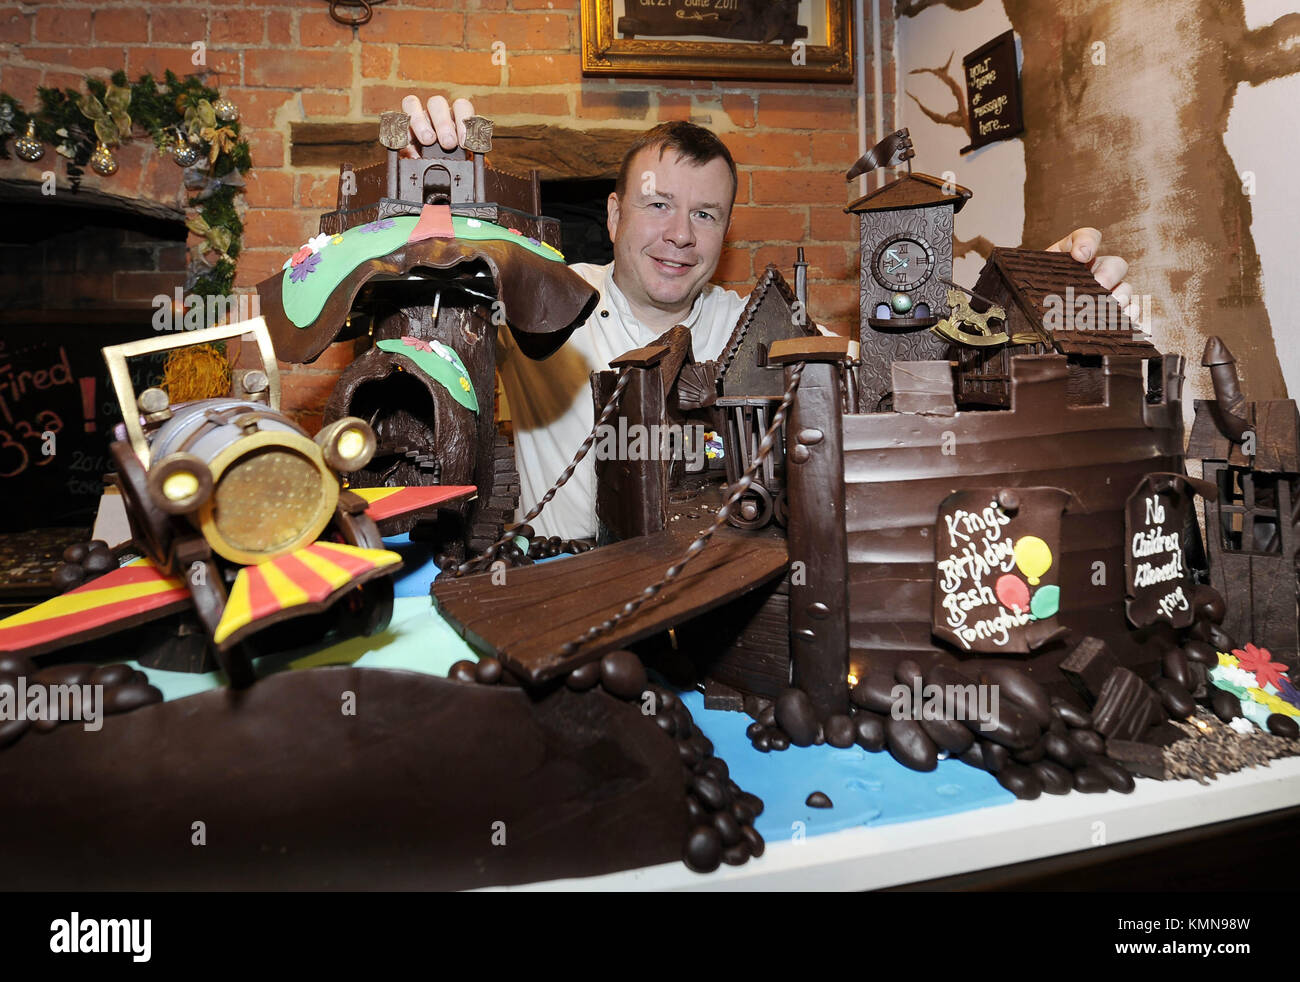 Ashley McCarthy, the chef and owner of Ye Old Sun Inn in Colton near York, with a chocolate tableau featuring scenes from Chitty Chitty Bang Bang that he has created to raise funds for the Martin House Children's Hospice near Leeds. McCarthy's chocolate artworks have raised thousands of pounds for the hospice over the past thirteen years. This year's effort took over 60 hours of melting, sticking and shaping 25kg of edible chocolate. Stock Photo